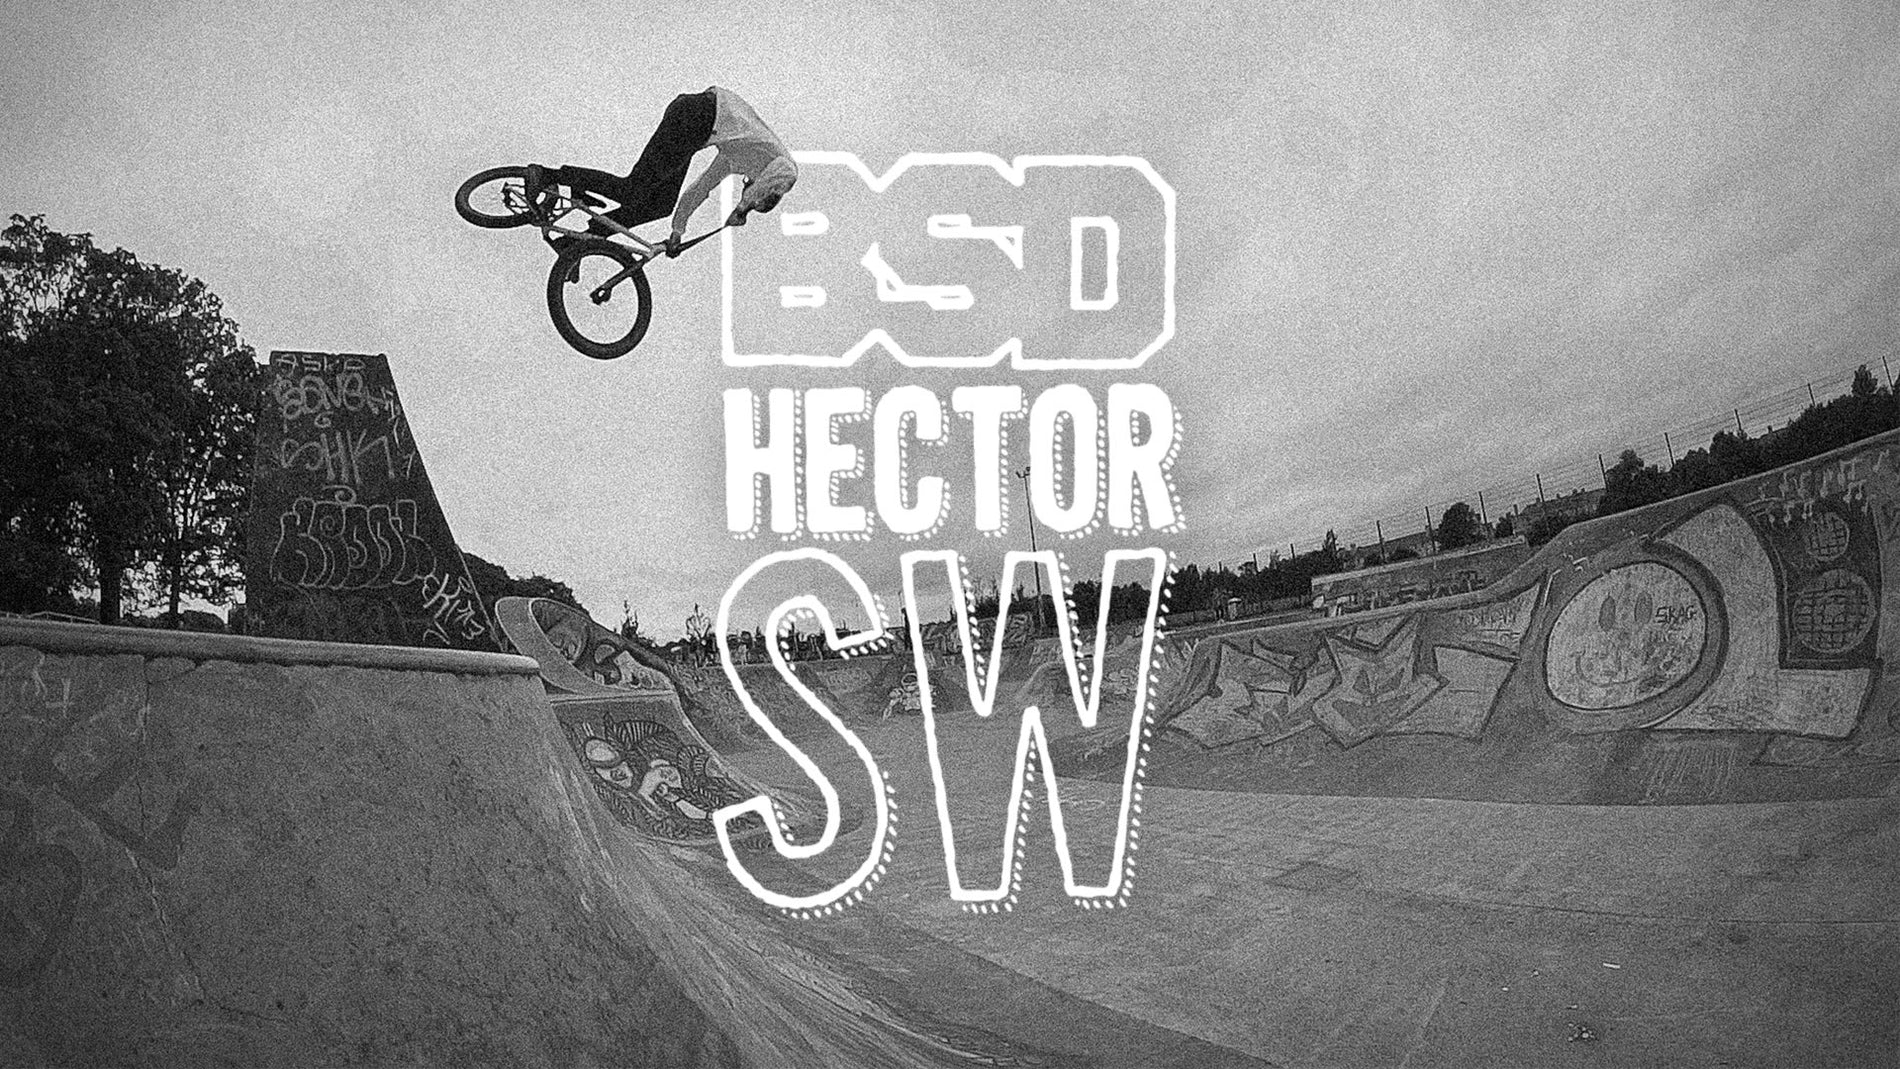 Hector SW and that wallride!